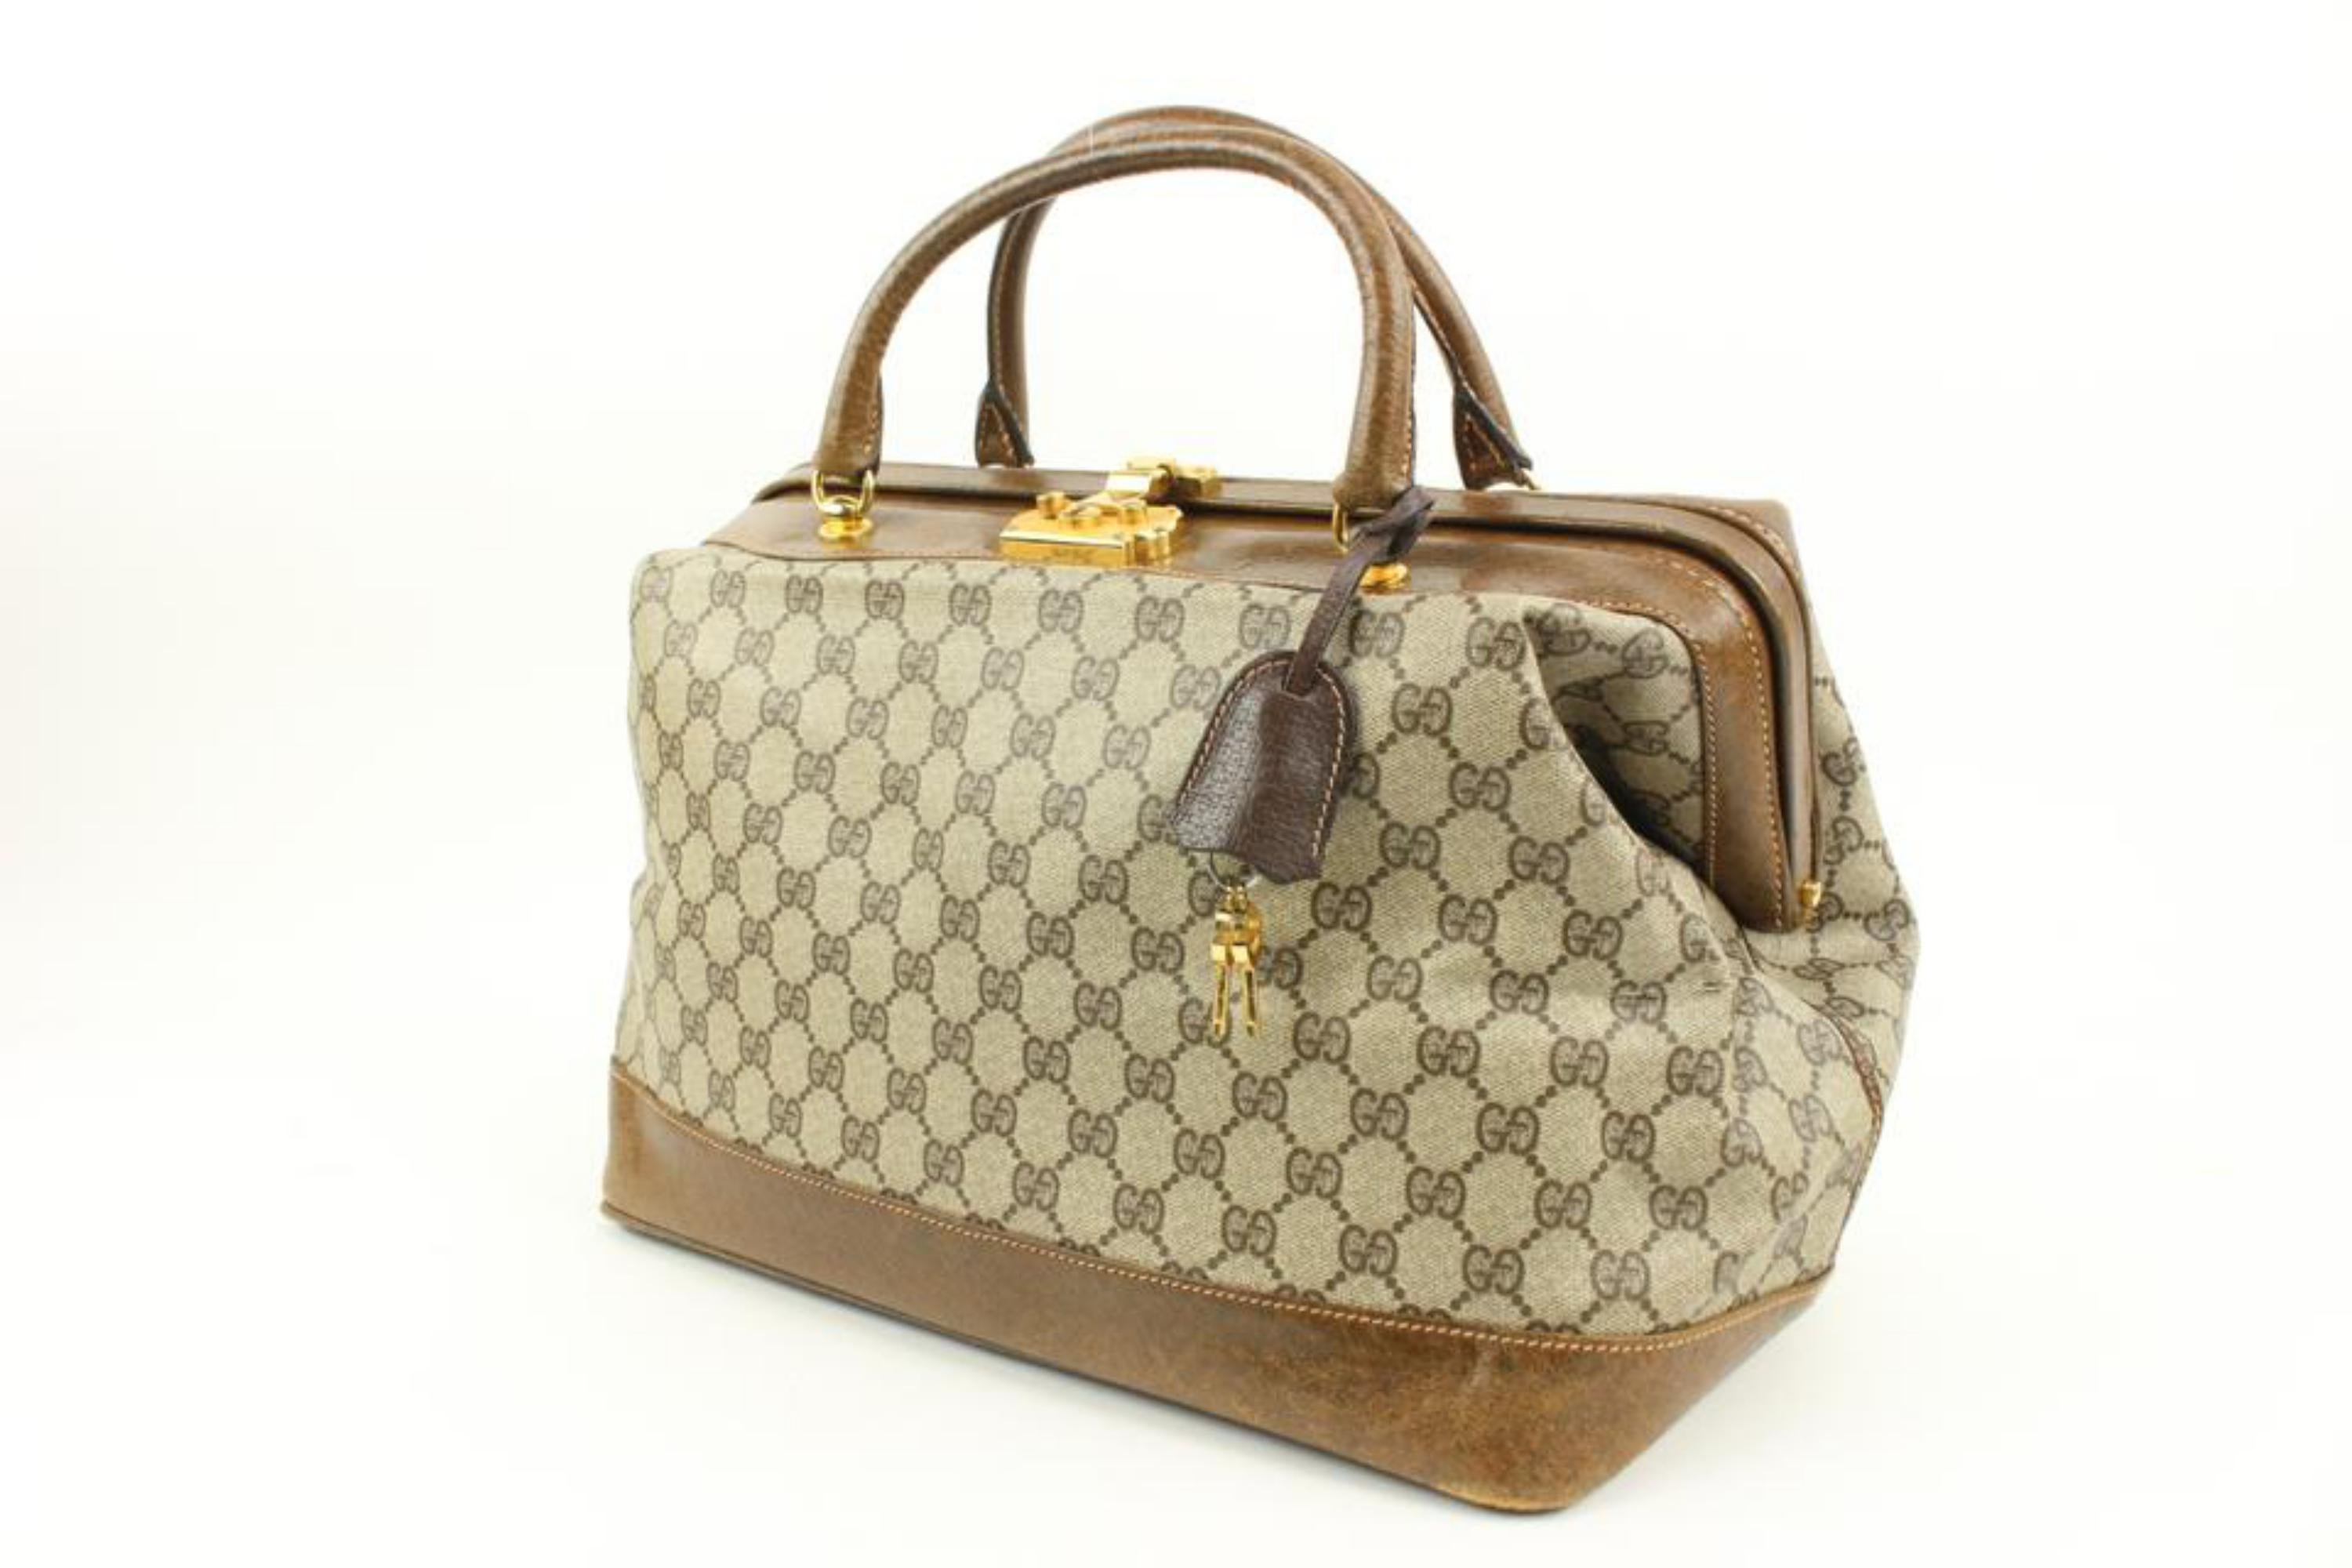 Gucci Monogram Supreme GG Doctors Bag 59g218s
Made In: Italy
Measurements: Length:  13.5